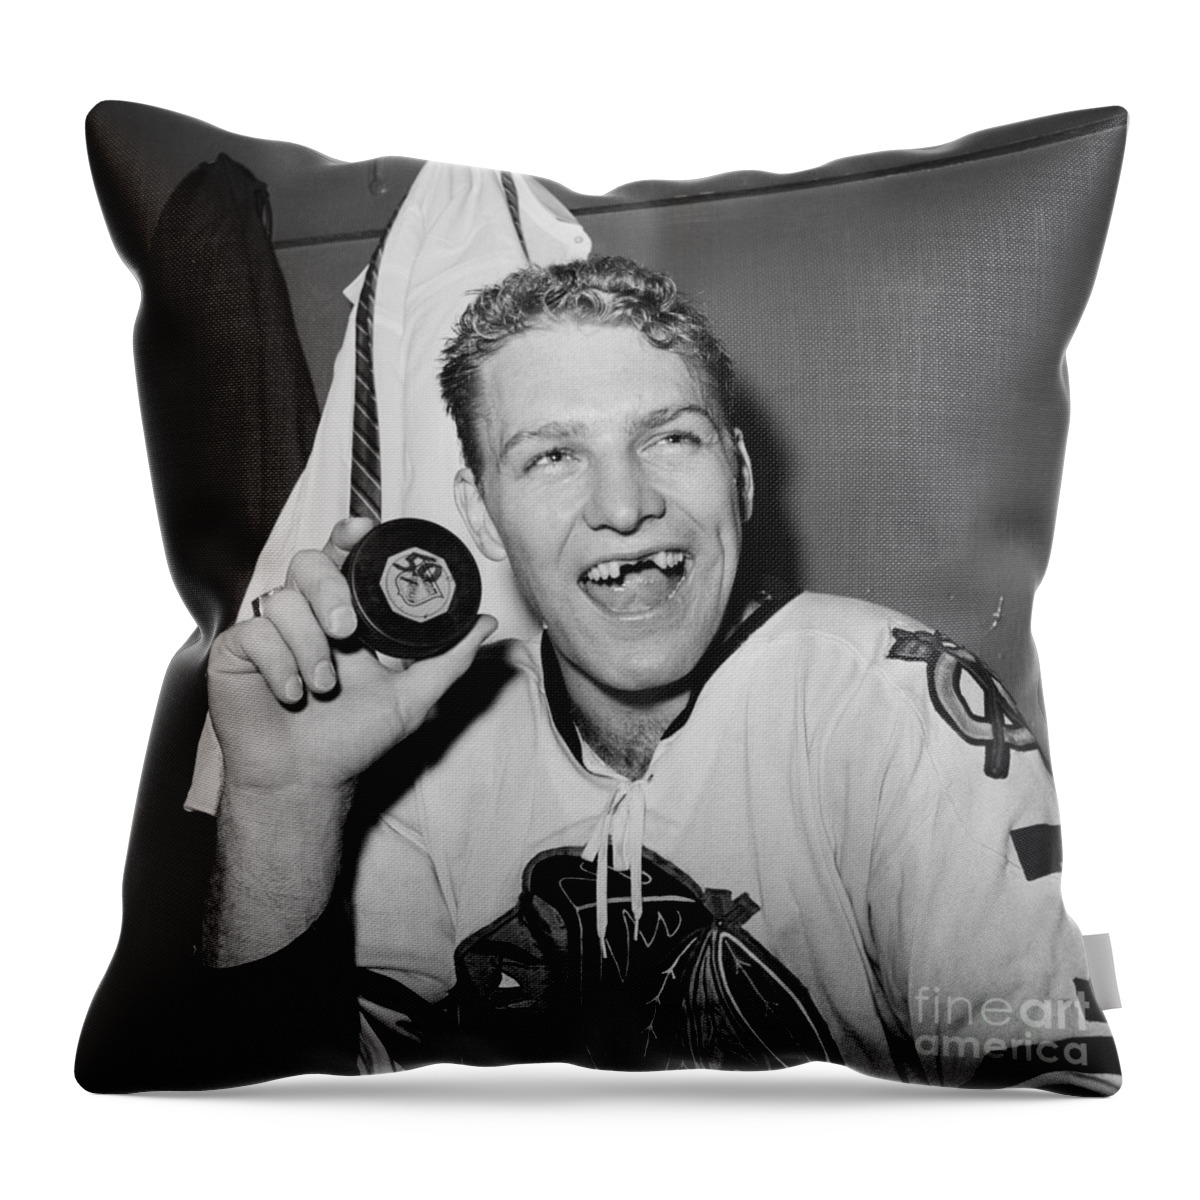 Bobby Throw Pillow featuring the photograph Bobby Hull 50 goal by Action